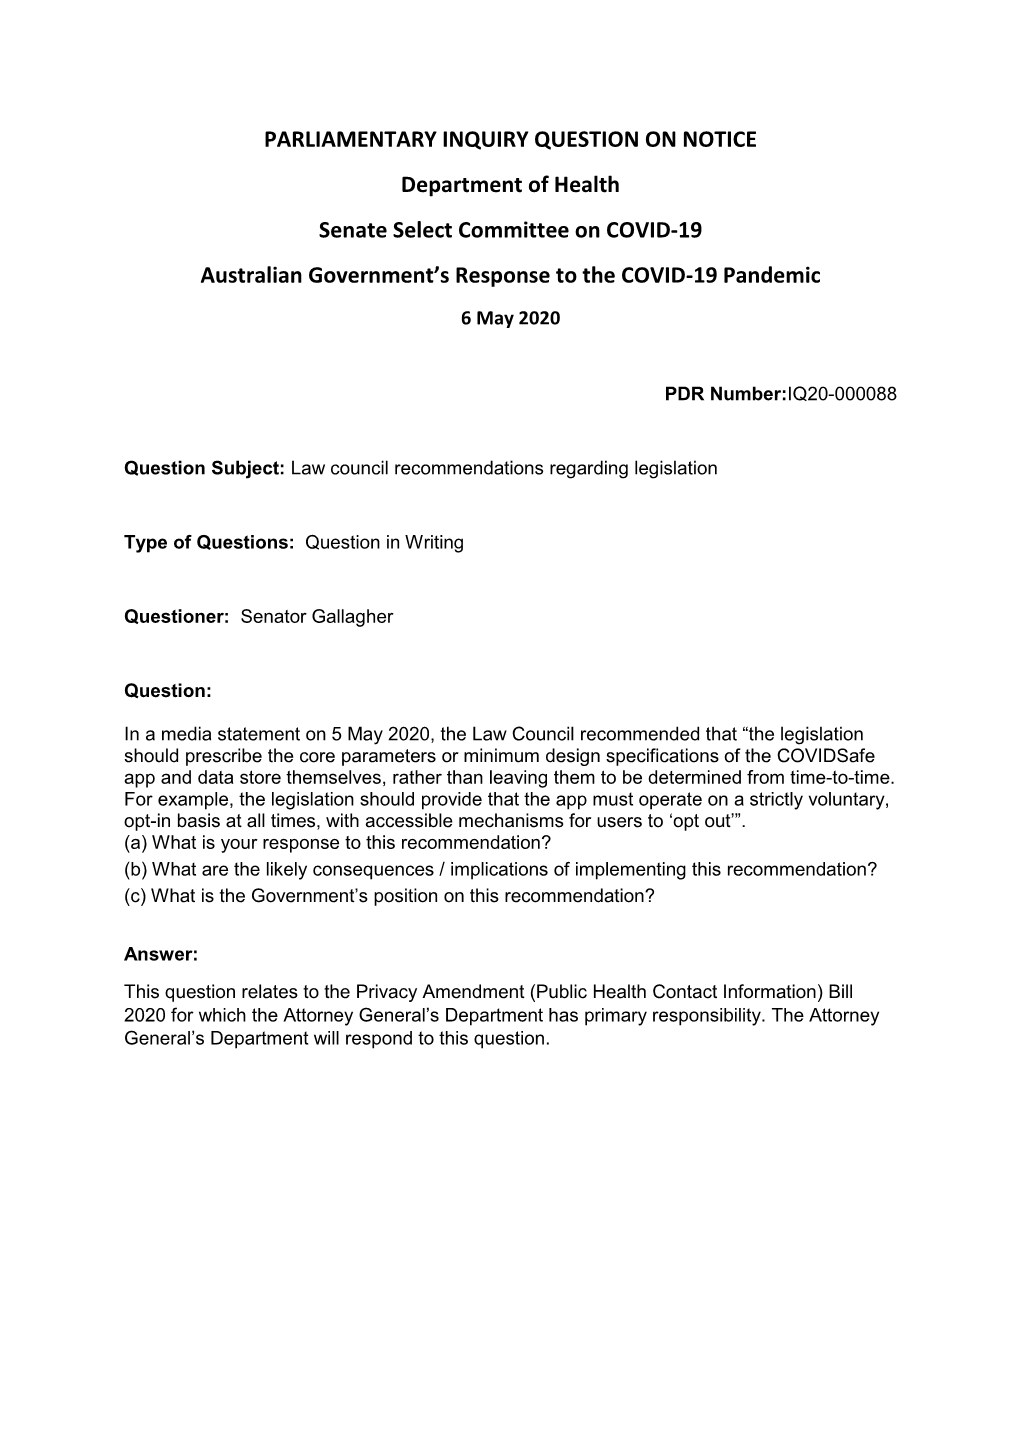 PARLIAMENTARY INQUIRY QUESTION on NOTICE Department of Health Senate Select Committee on COVID-19